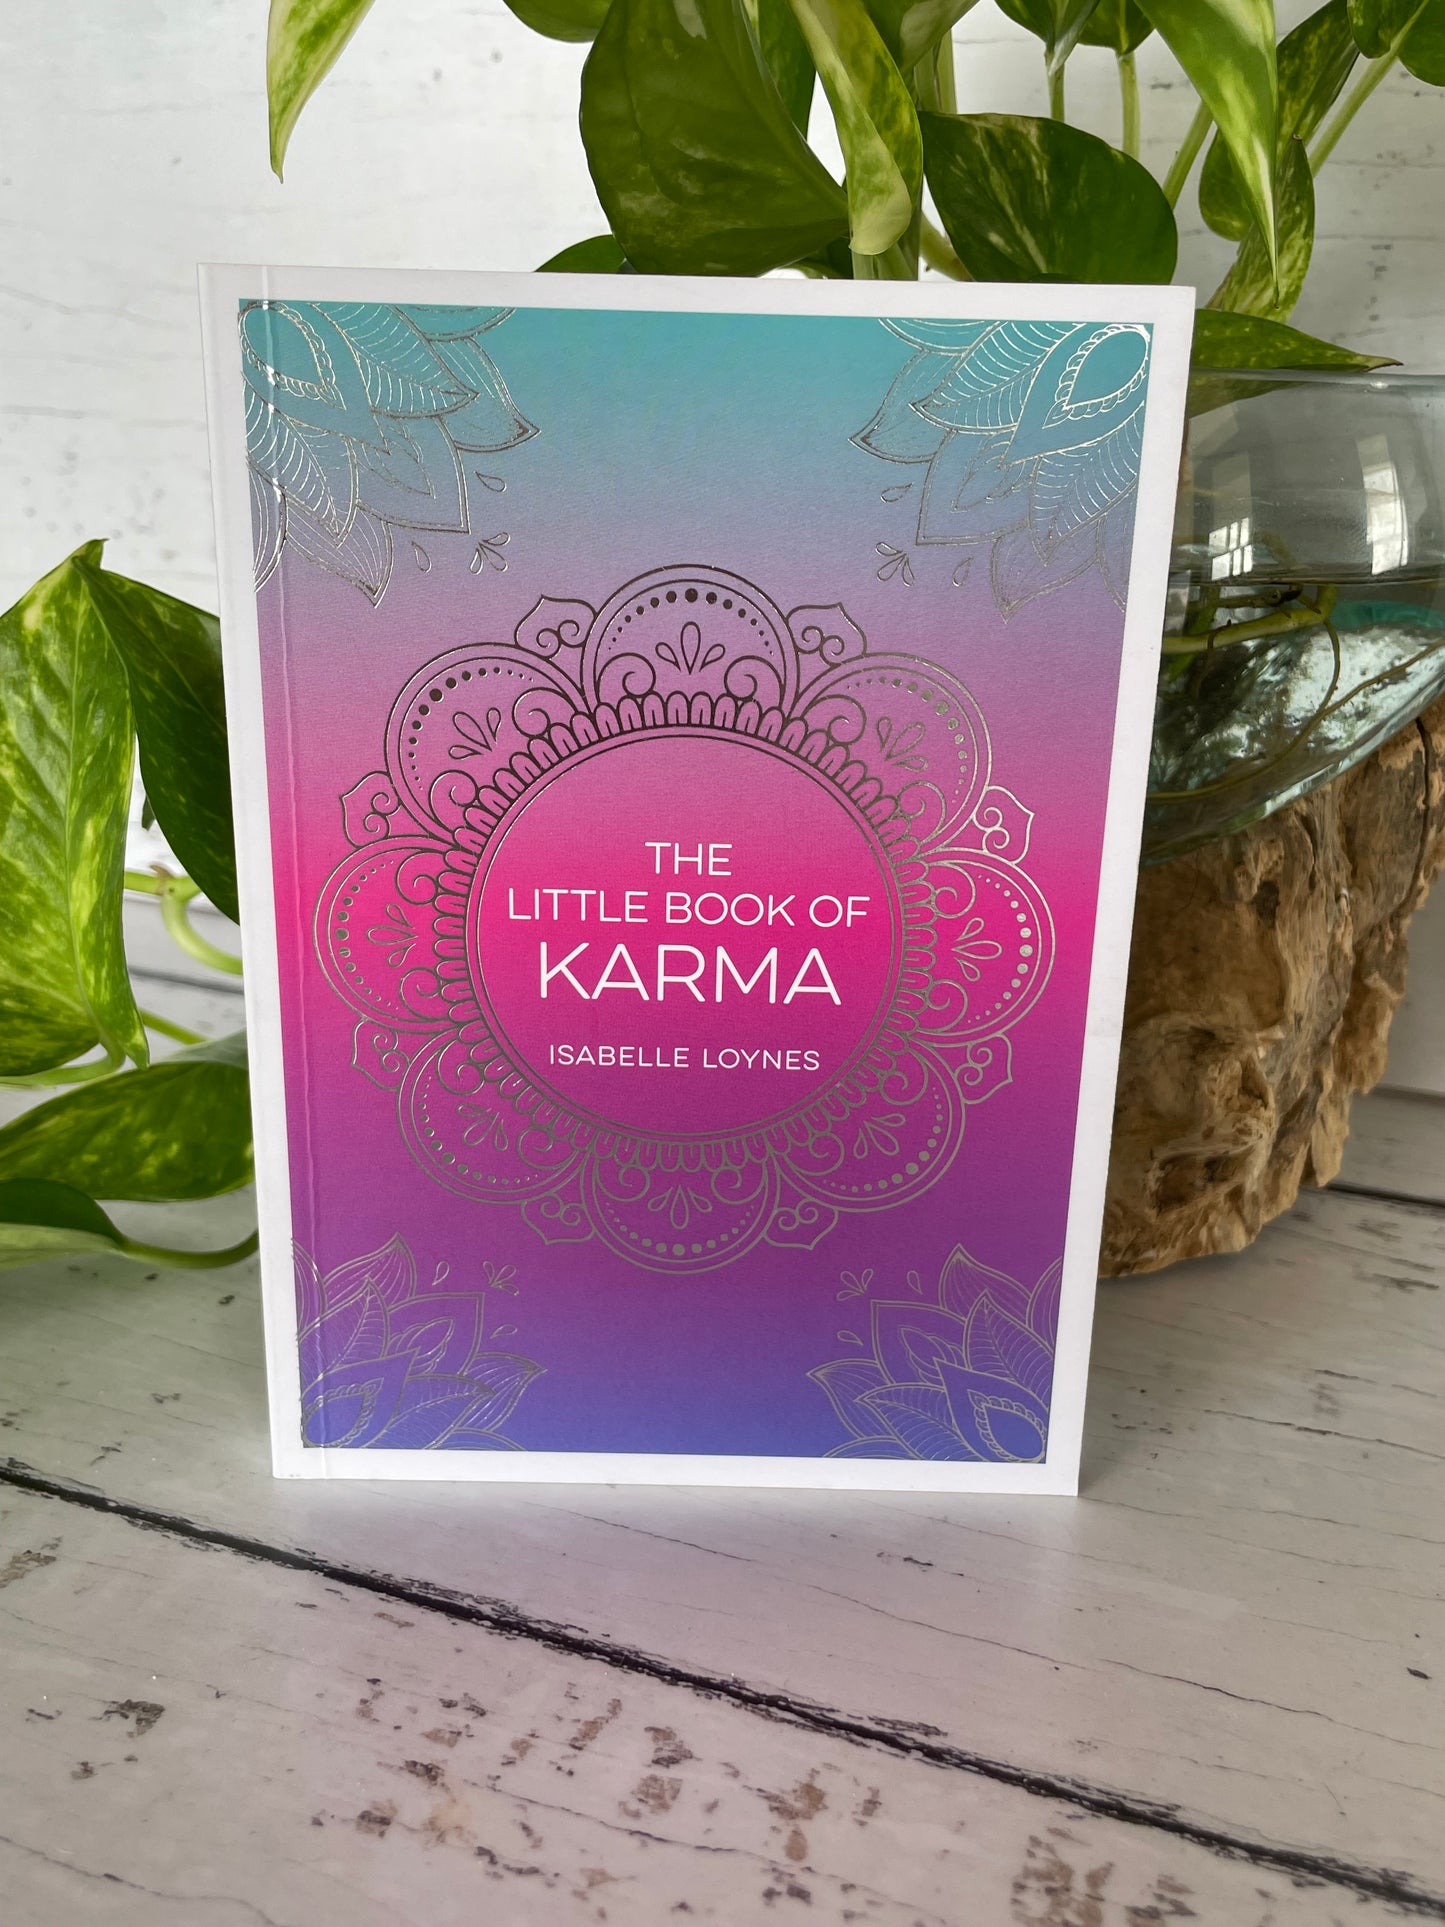 The Little Book of Karma